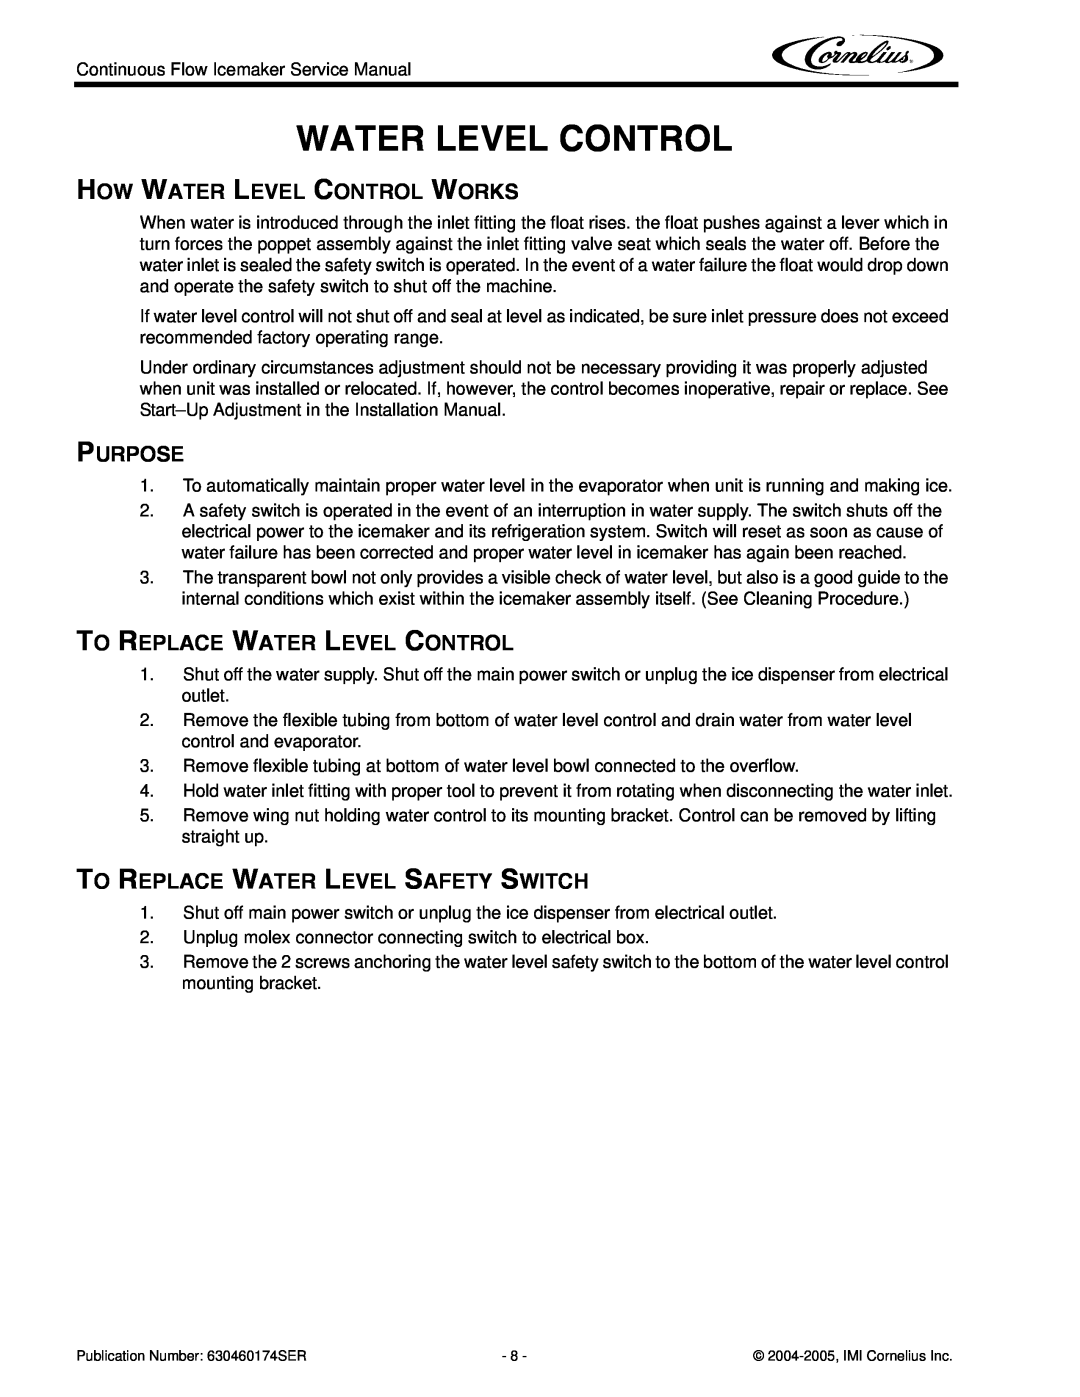 Cornelius 1000 service manual How Water Level Control Works, Purpose, To Replace Water Level Control 